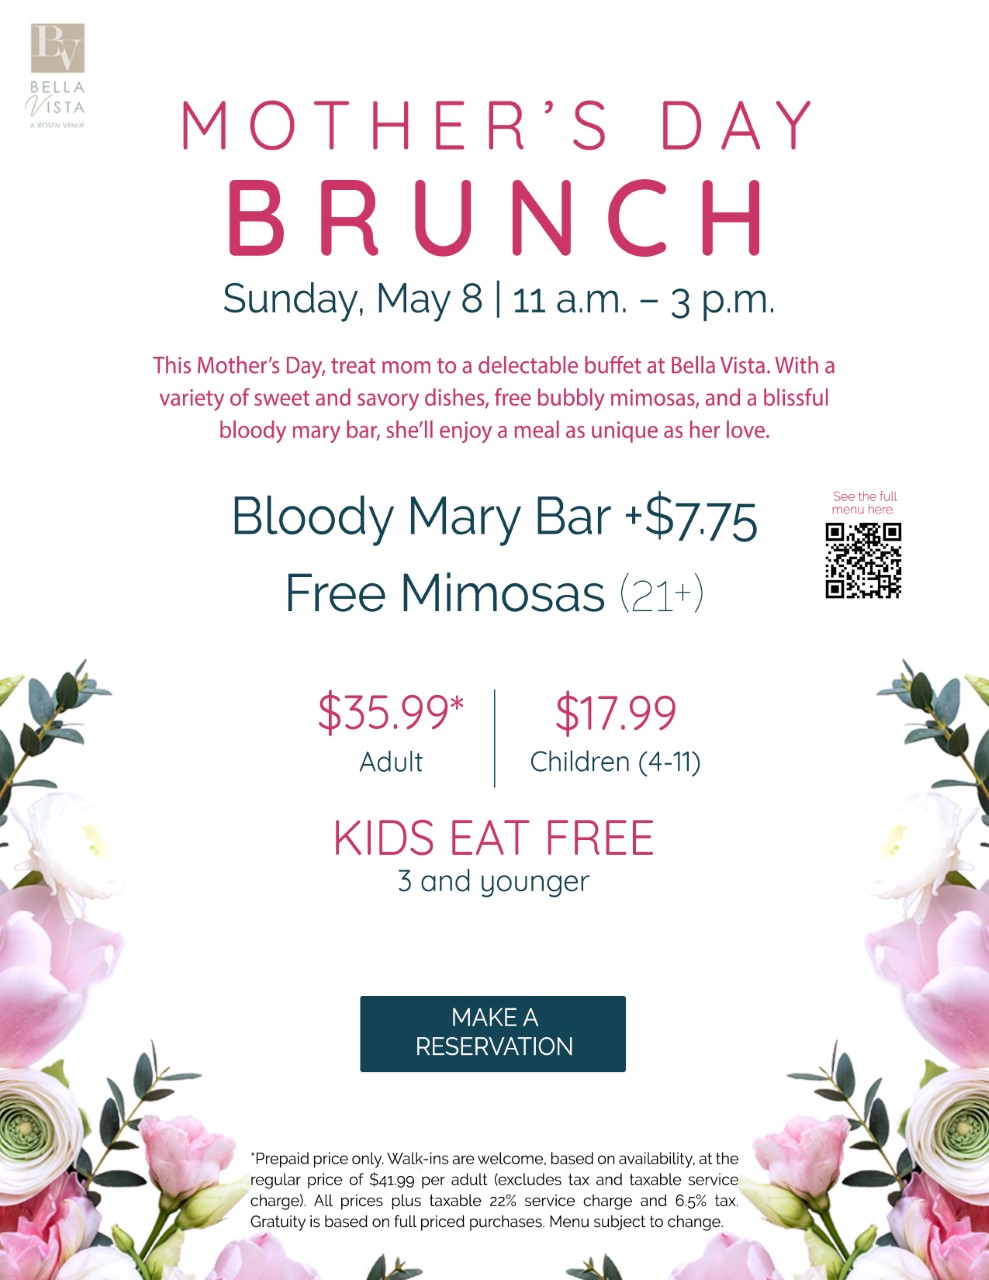 Mother's Day Brunch
Sunday, May 8 | 11 a.m. - 3 p.m.

This Mother's Day, treat mom to a delectable buffet at Bella Vista. With a variety of sweet and savory dishes, free bubbly mimosas, and a blissful blood mary bar, she'll enjoy a meal as unique as her love.

Bloody Mary Bar +$7.75
Free Mimosas (21+)

$35.99* Adult
$17.99 Children (4-11)

Kids Eat Free
3 and younger

*Prepaid price only. Walk-ins are welcome, based in availability, at the regular price of $41.99 per adult (excludes tax and taxable service charge). All prices plus taxable 22% service charge and 6.5% tax. Gratuity is based on full priced purchases. Menu subject to change.